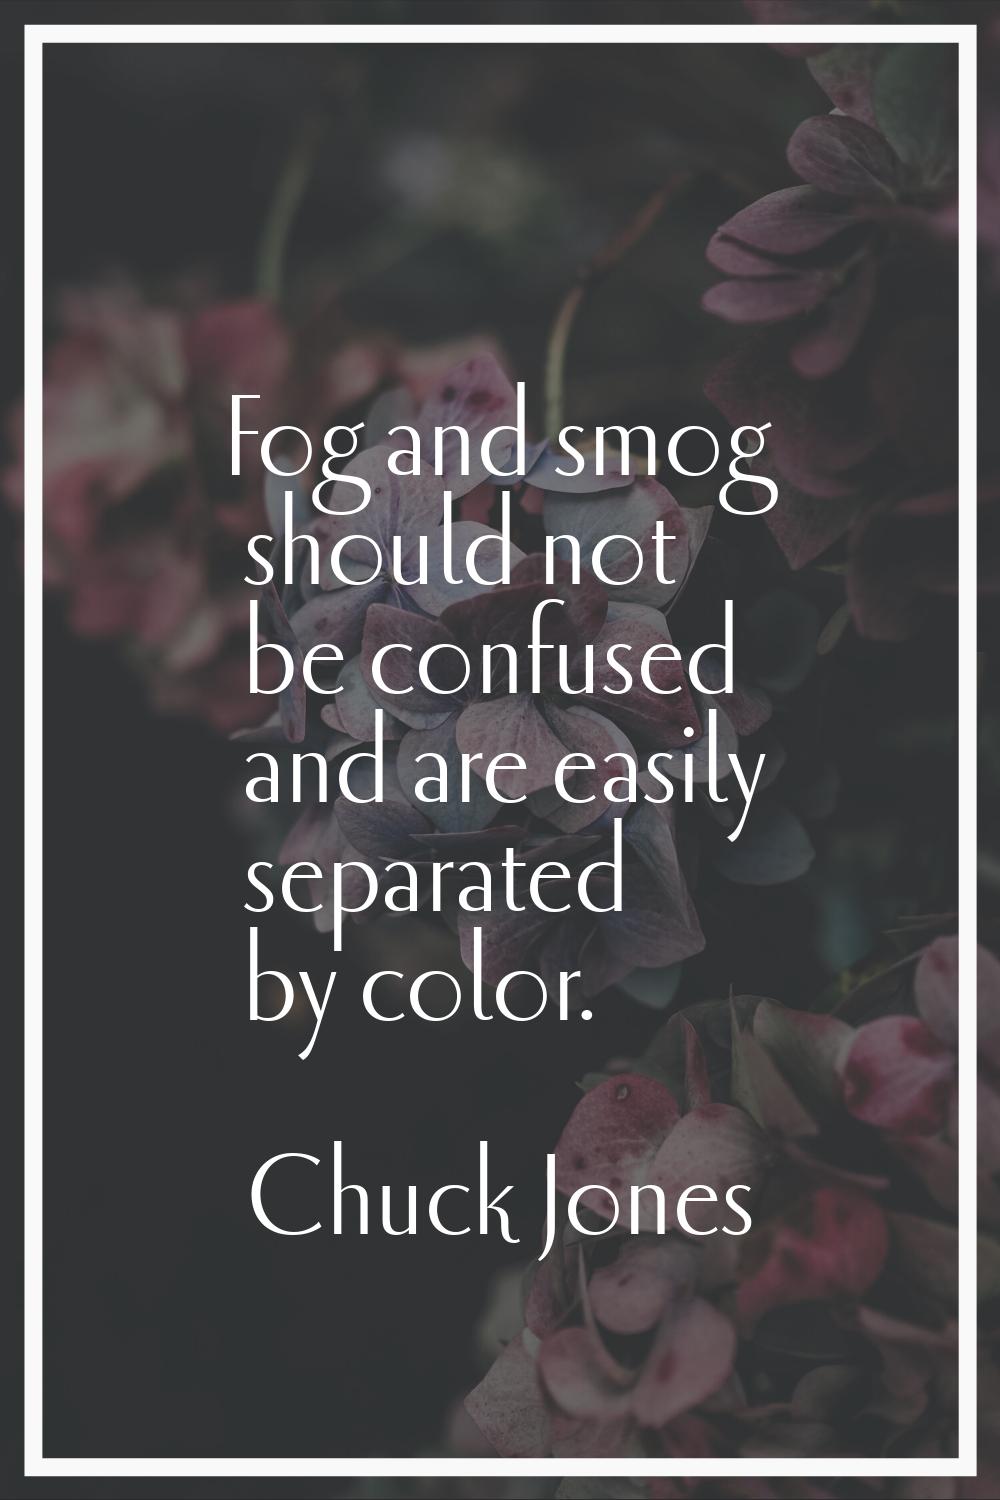 Fog and smog should not be confused and are easily separated by color.